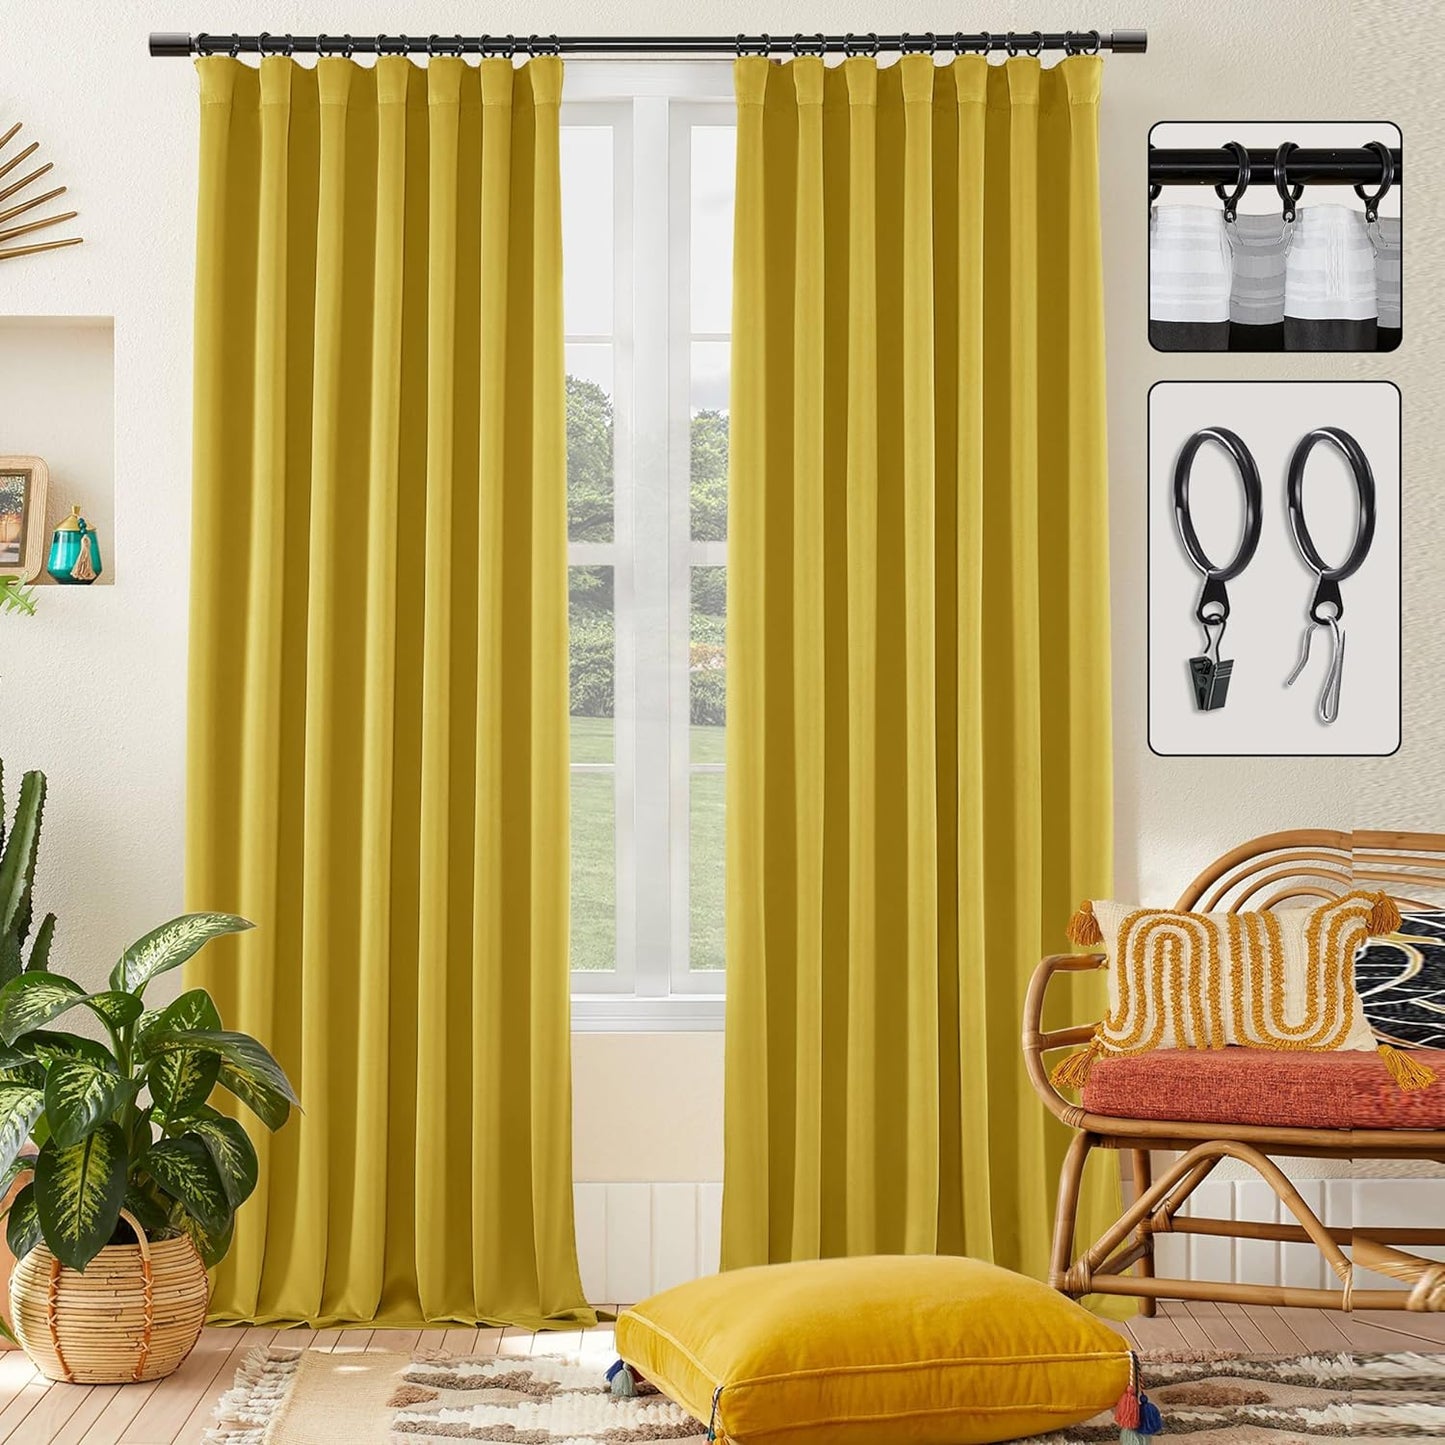 SHINELAND Beige Room Darkening Curtains 105 Inches Long for Living Room Bedroom,Cortinas Para Cuarto Bloqueador De Luz,Thermal Insulated Back Tab Pleat Blackout Curtains for Sunroom Patio Door Indoor  SHINELAND Mustard Yellow 2X(52"Wx96"L) 